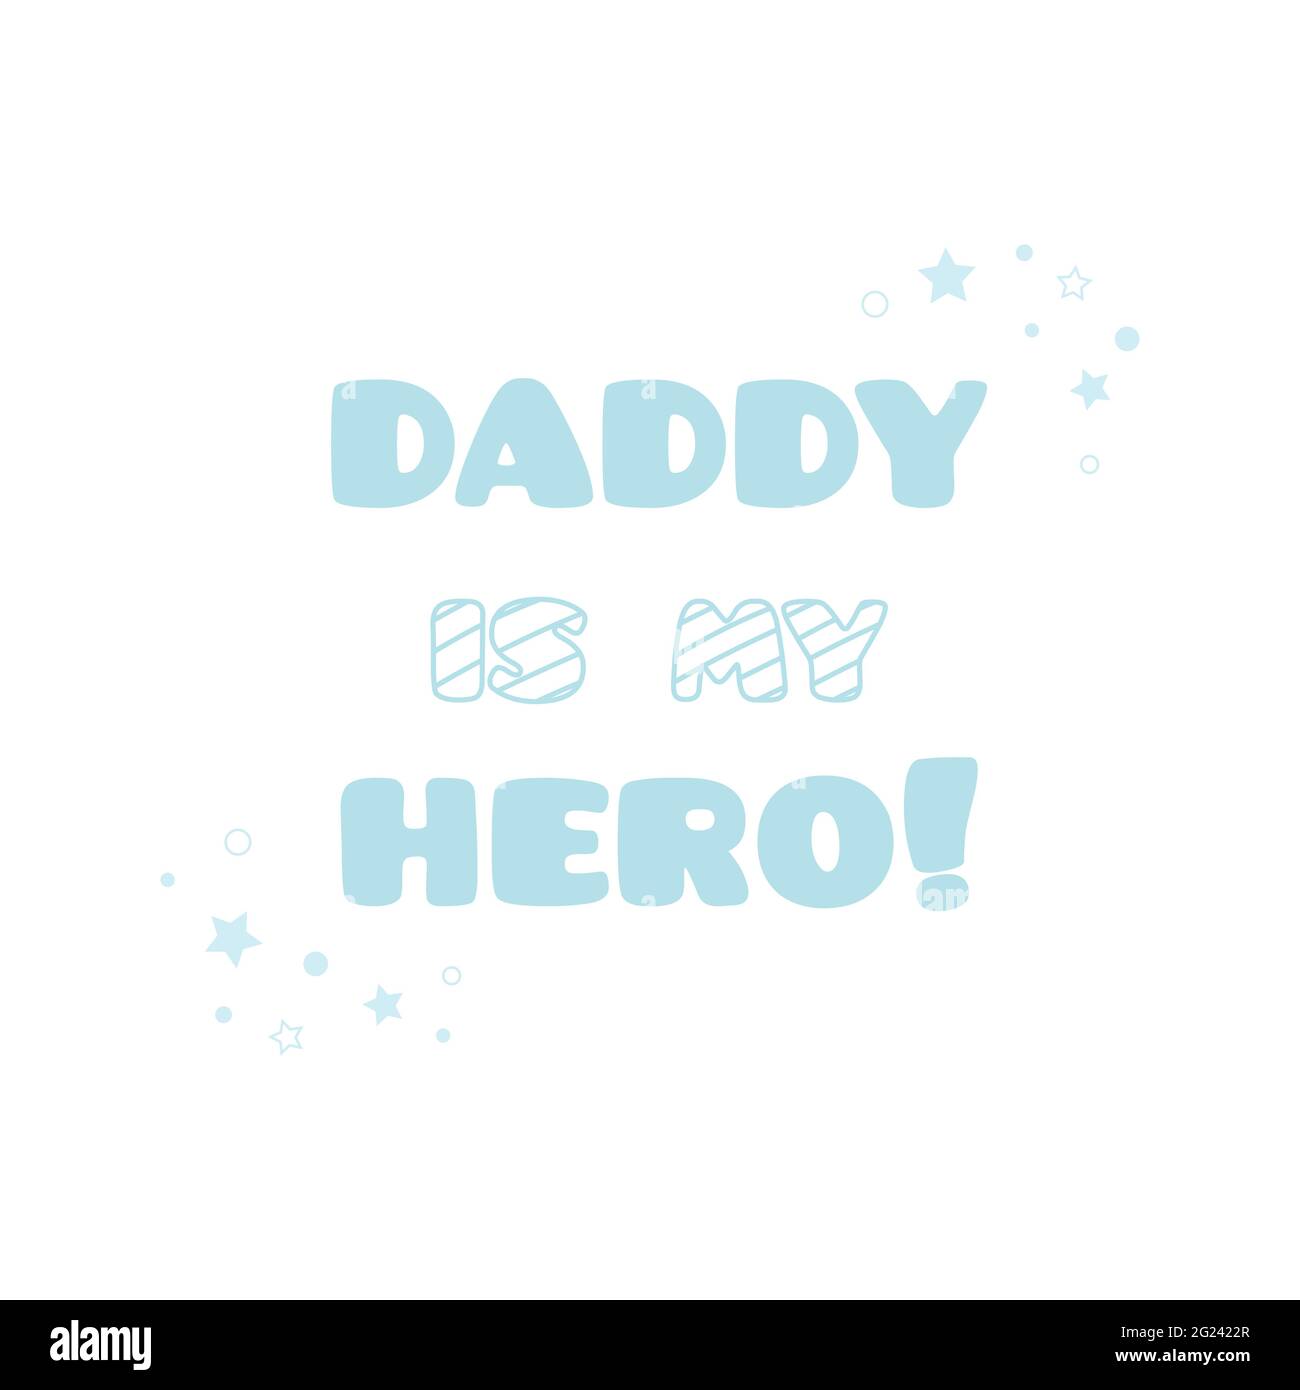 Daddy is my hero illustration concept. Vector. Stock Vector